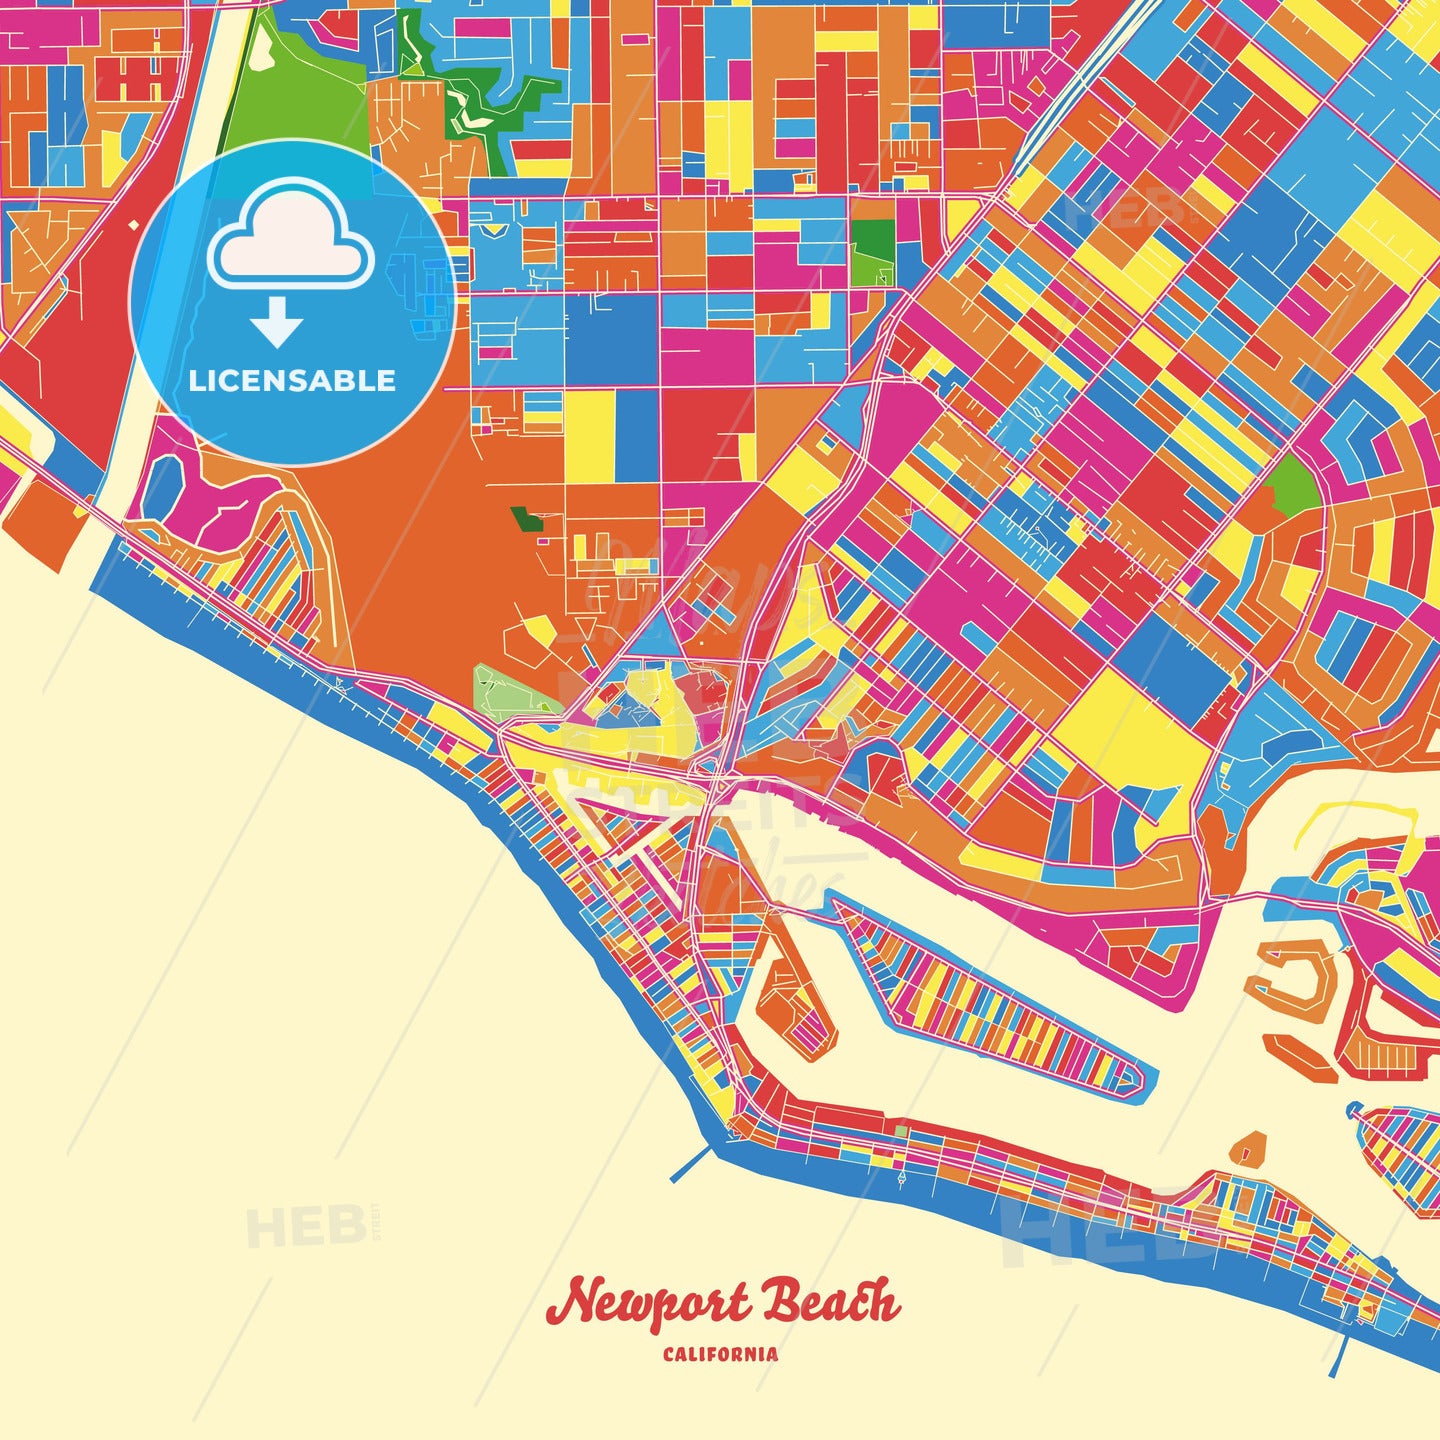 Newport Beach, United States Crazy Colorful Street Map Poster Template - HEBSTREITS Sketches